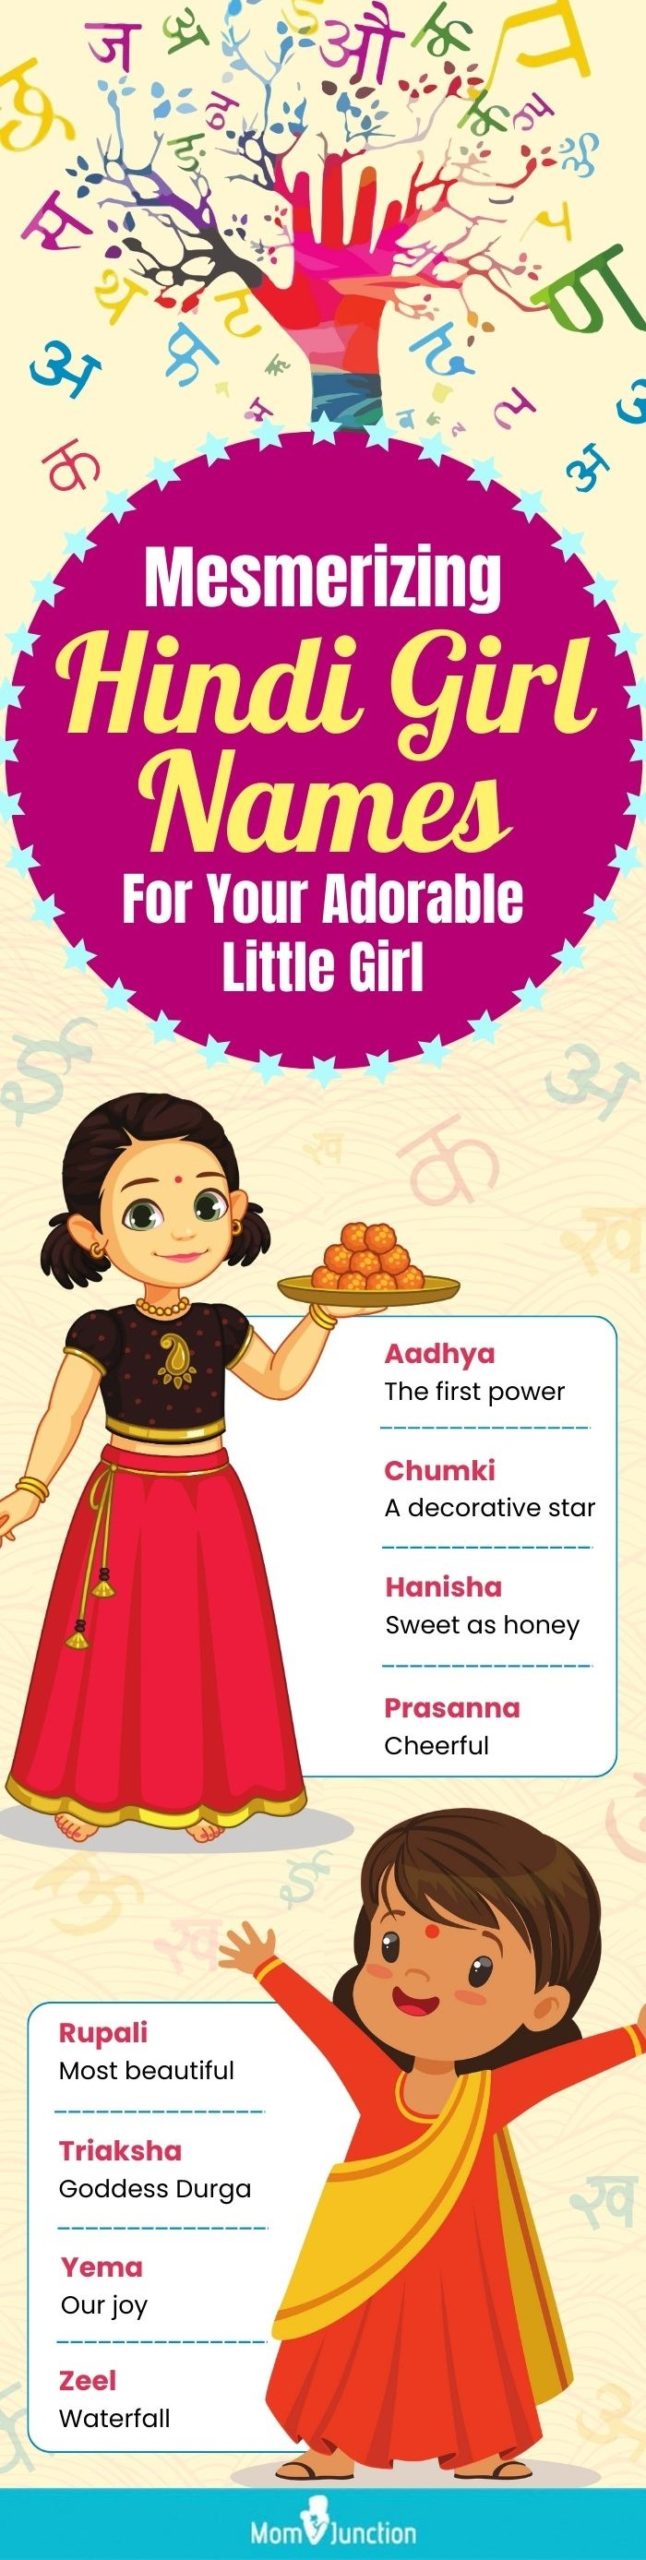 Hindi Baby Girl Names With Meanings (infographic)